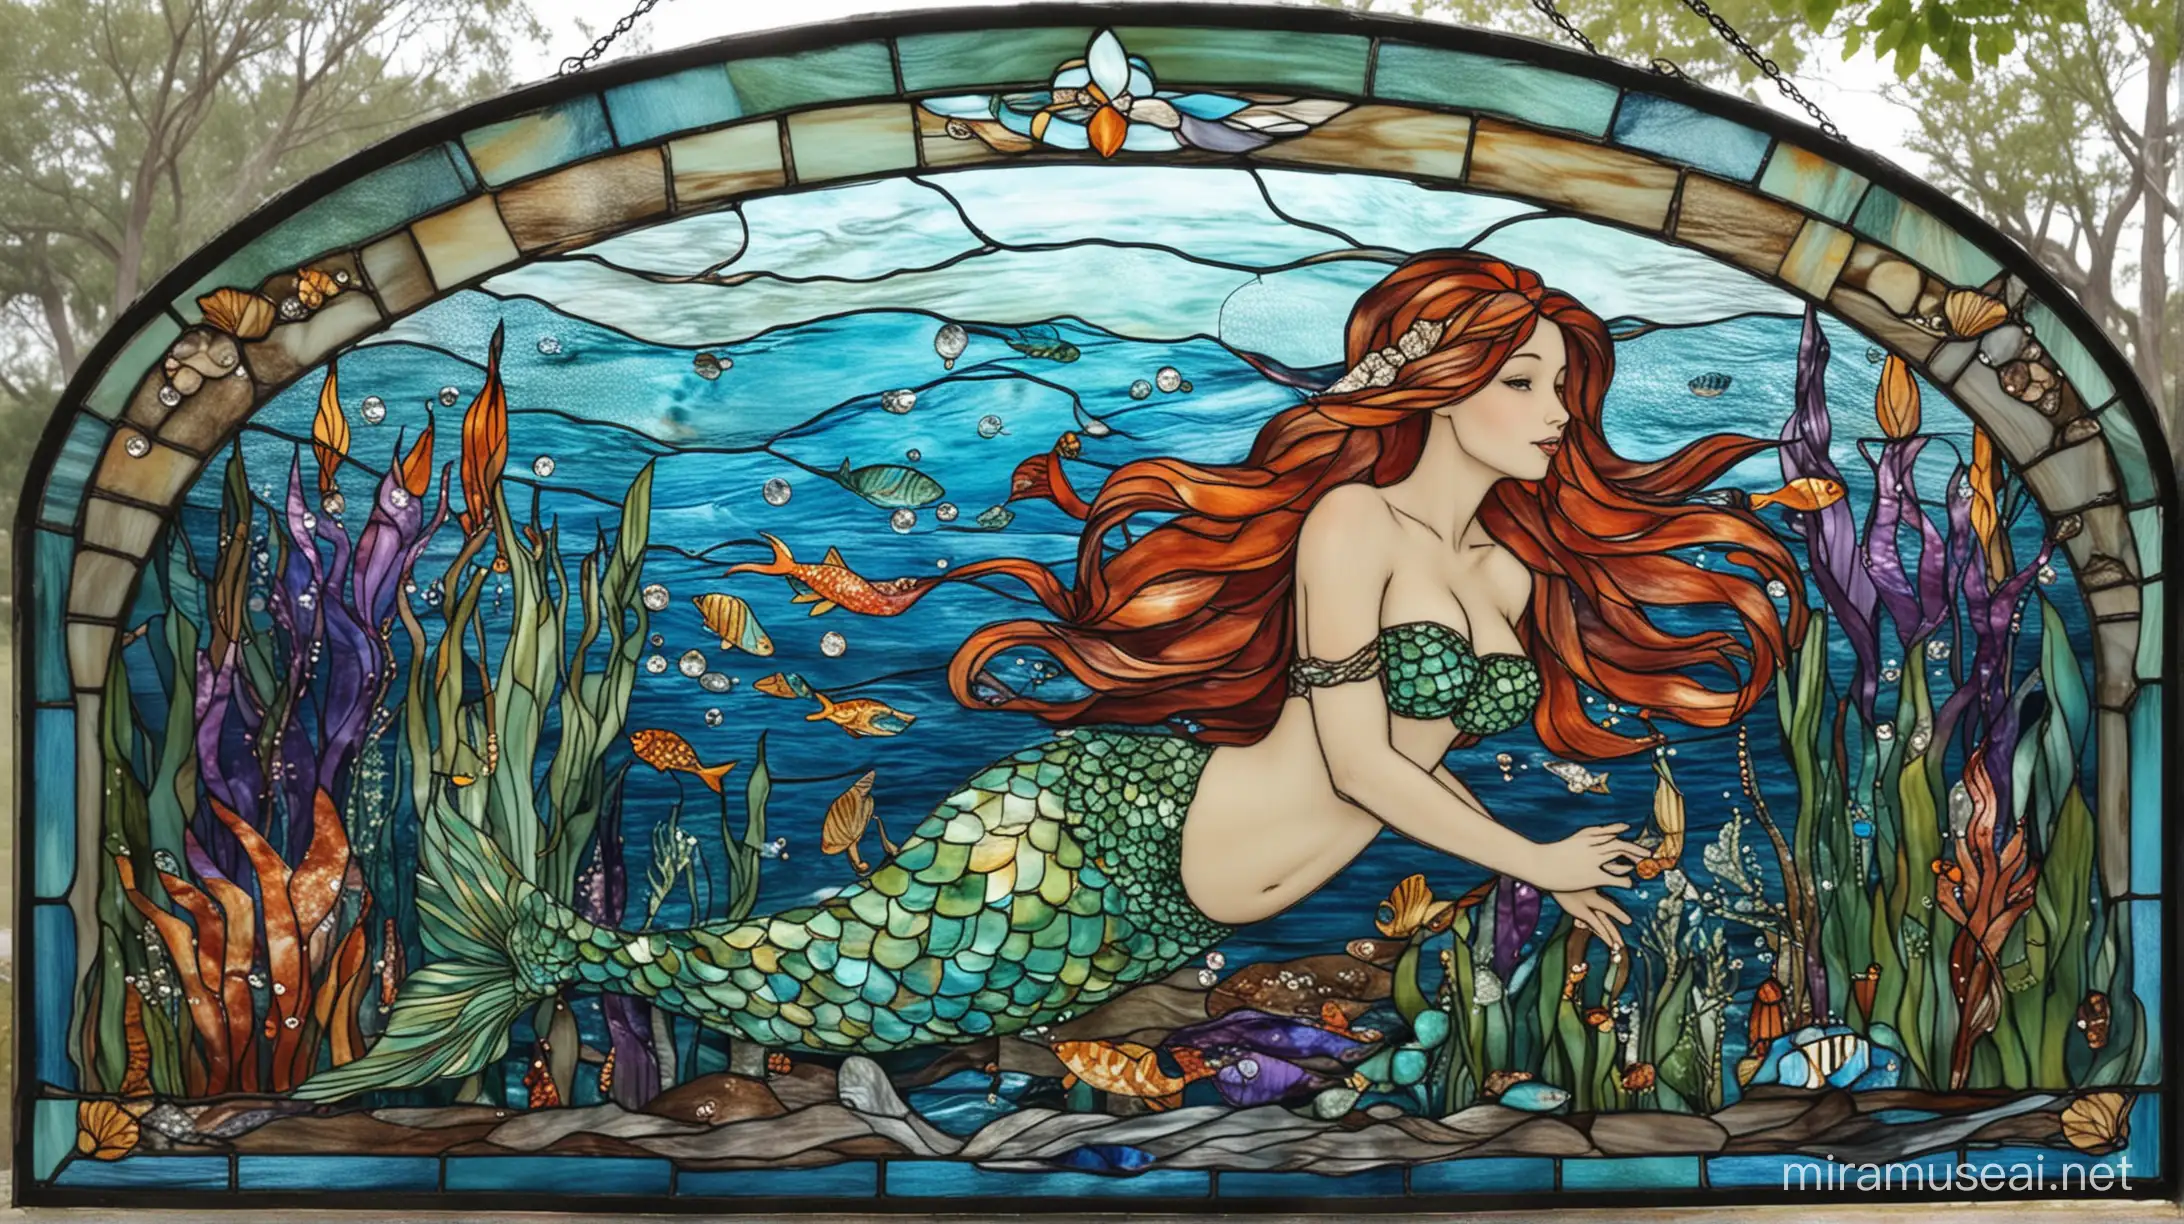 Mermaid stained glass